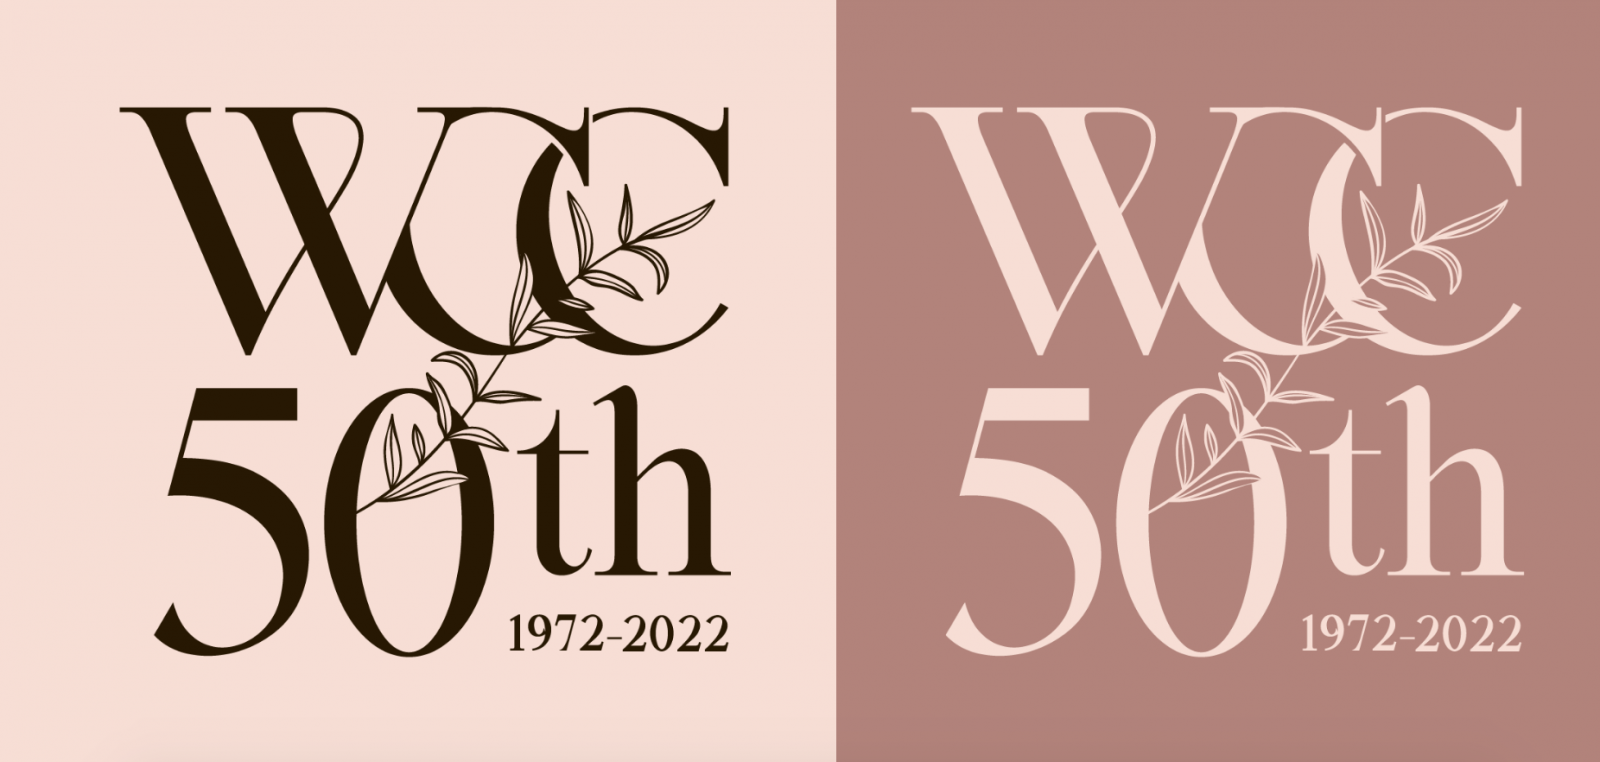 Logo reading WCC 50th, 1972-2022 with an olive branch